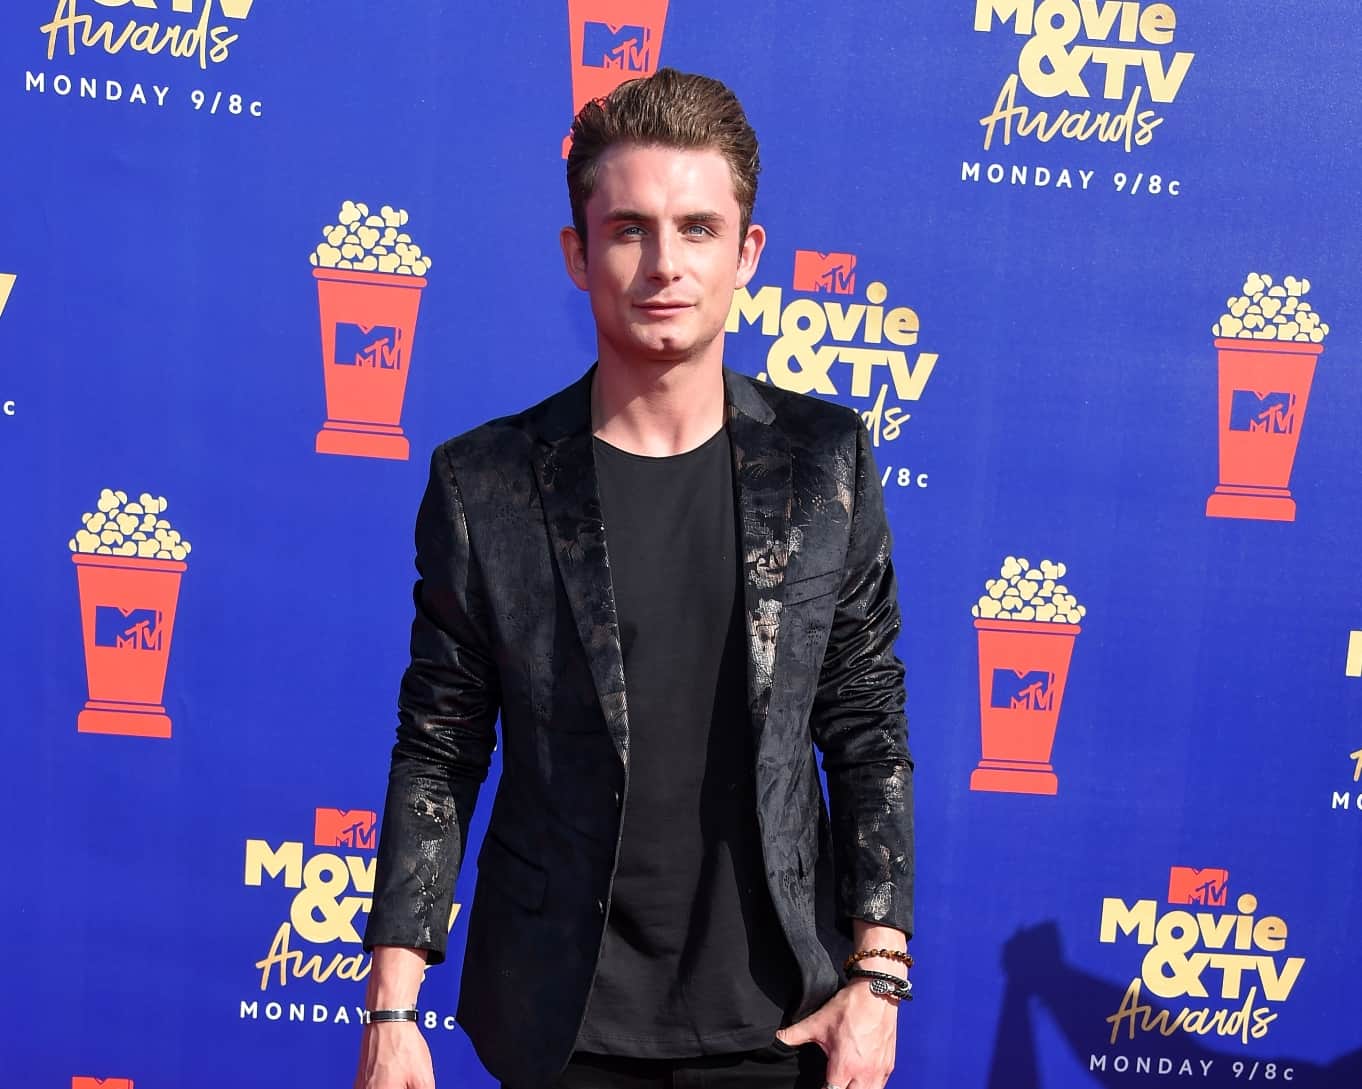 Vanderpump Rules' James Kennedy Announces He's One-Year Sober, See the Reactions of Jax, Randall, and Costars as He Applauds Girlfriend Raquel Leviss as His "Rock"